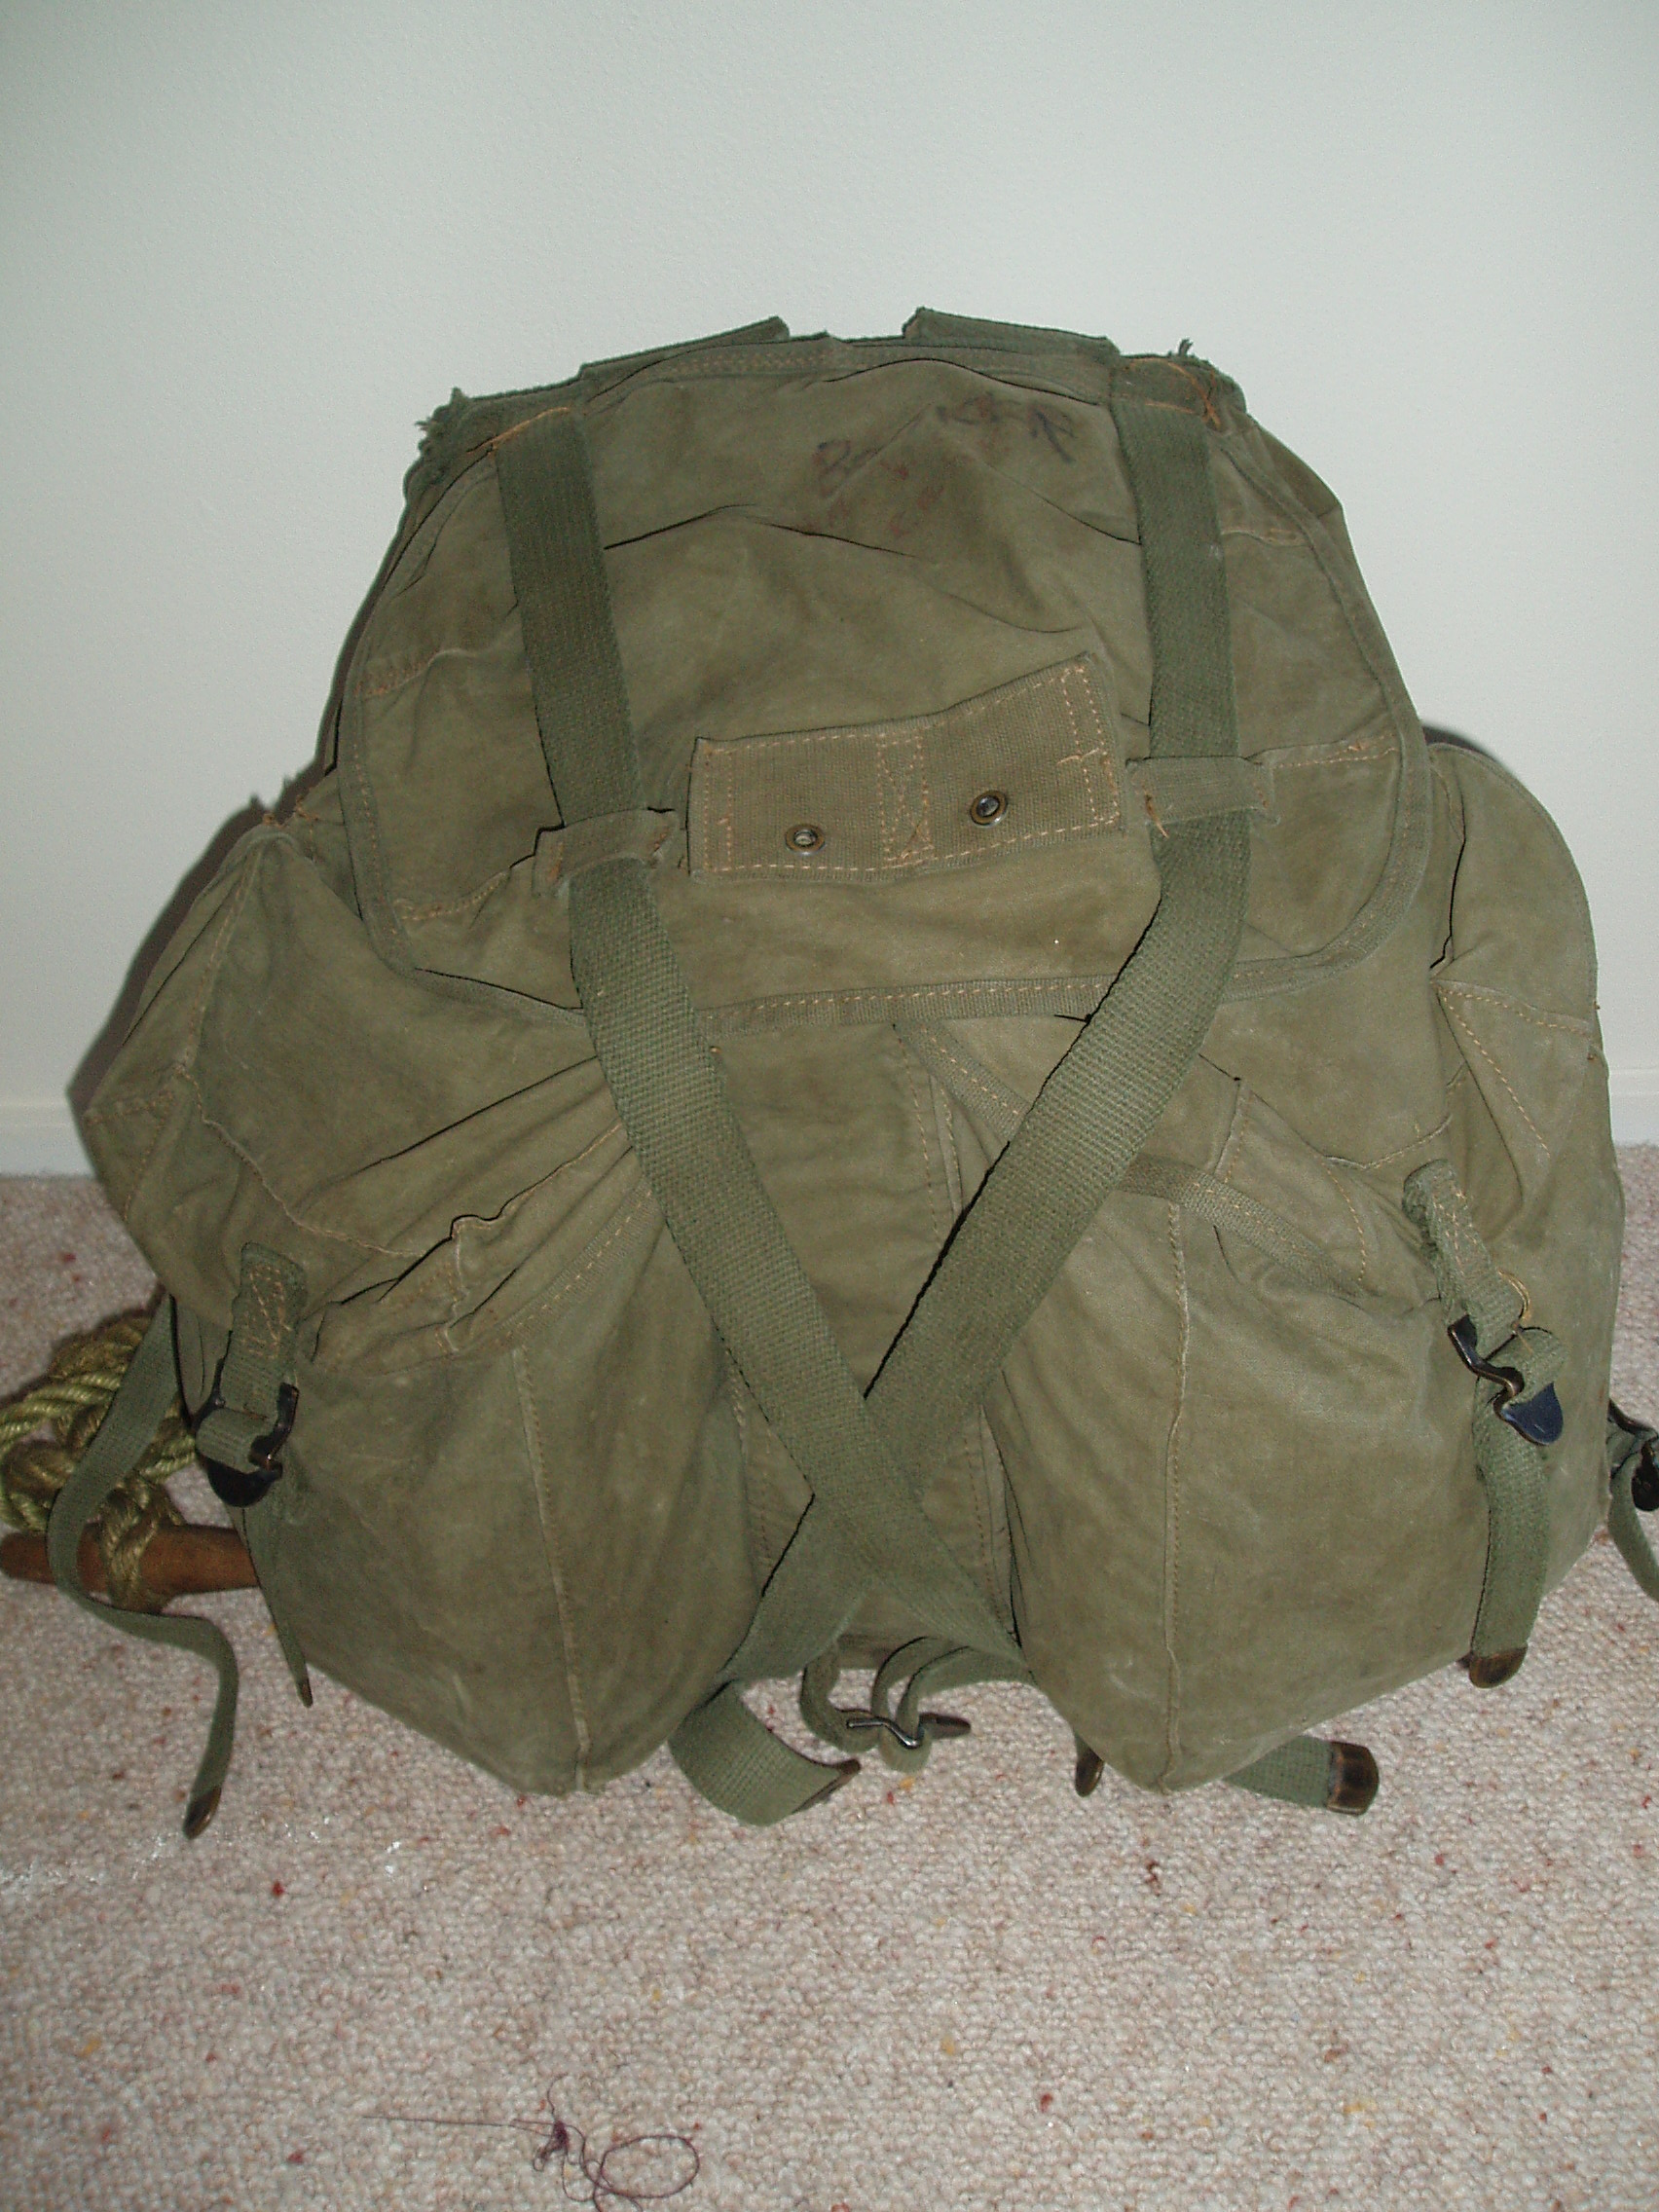 Norman Bookers ARVN pack 